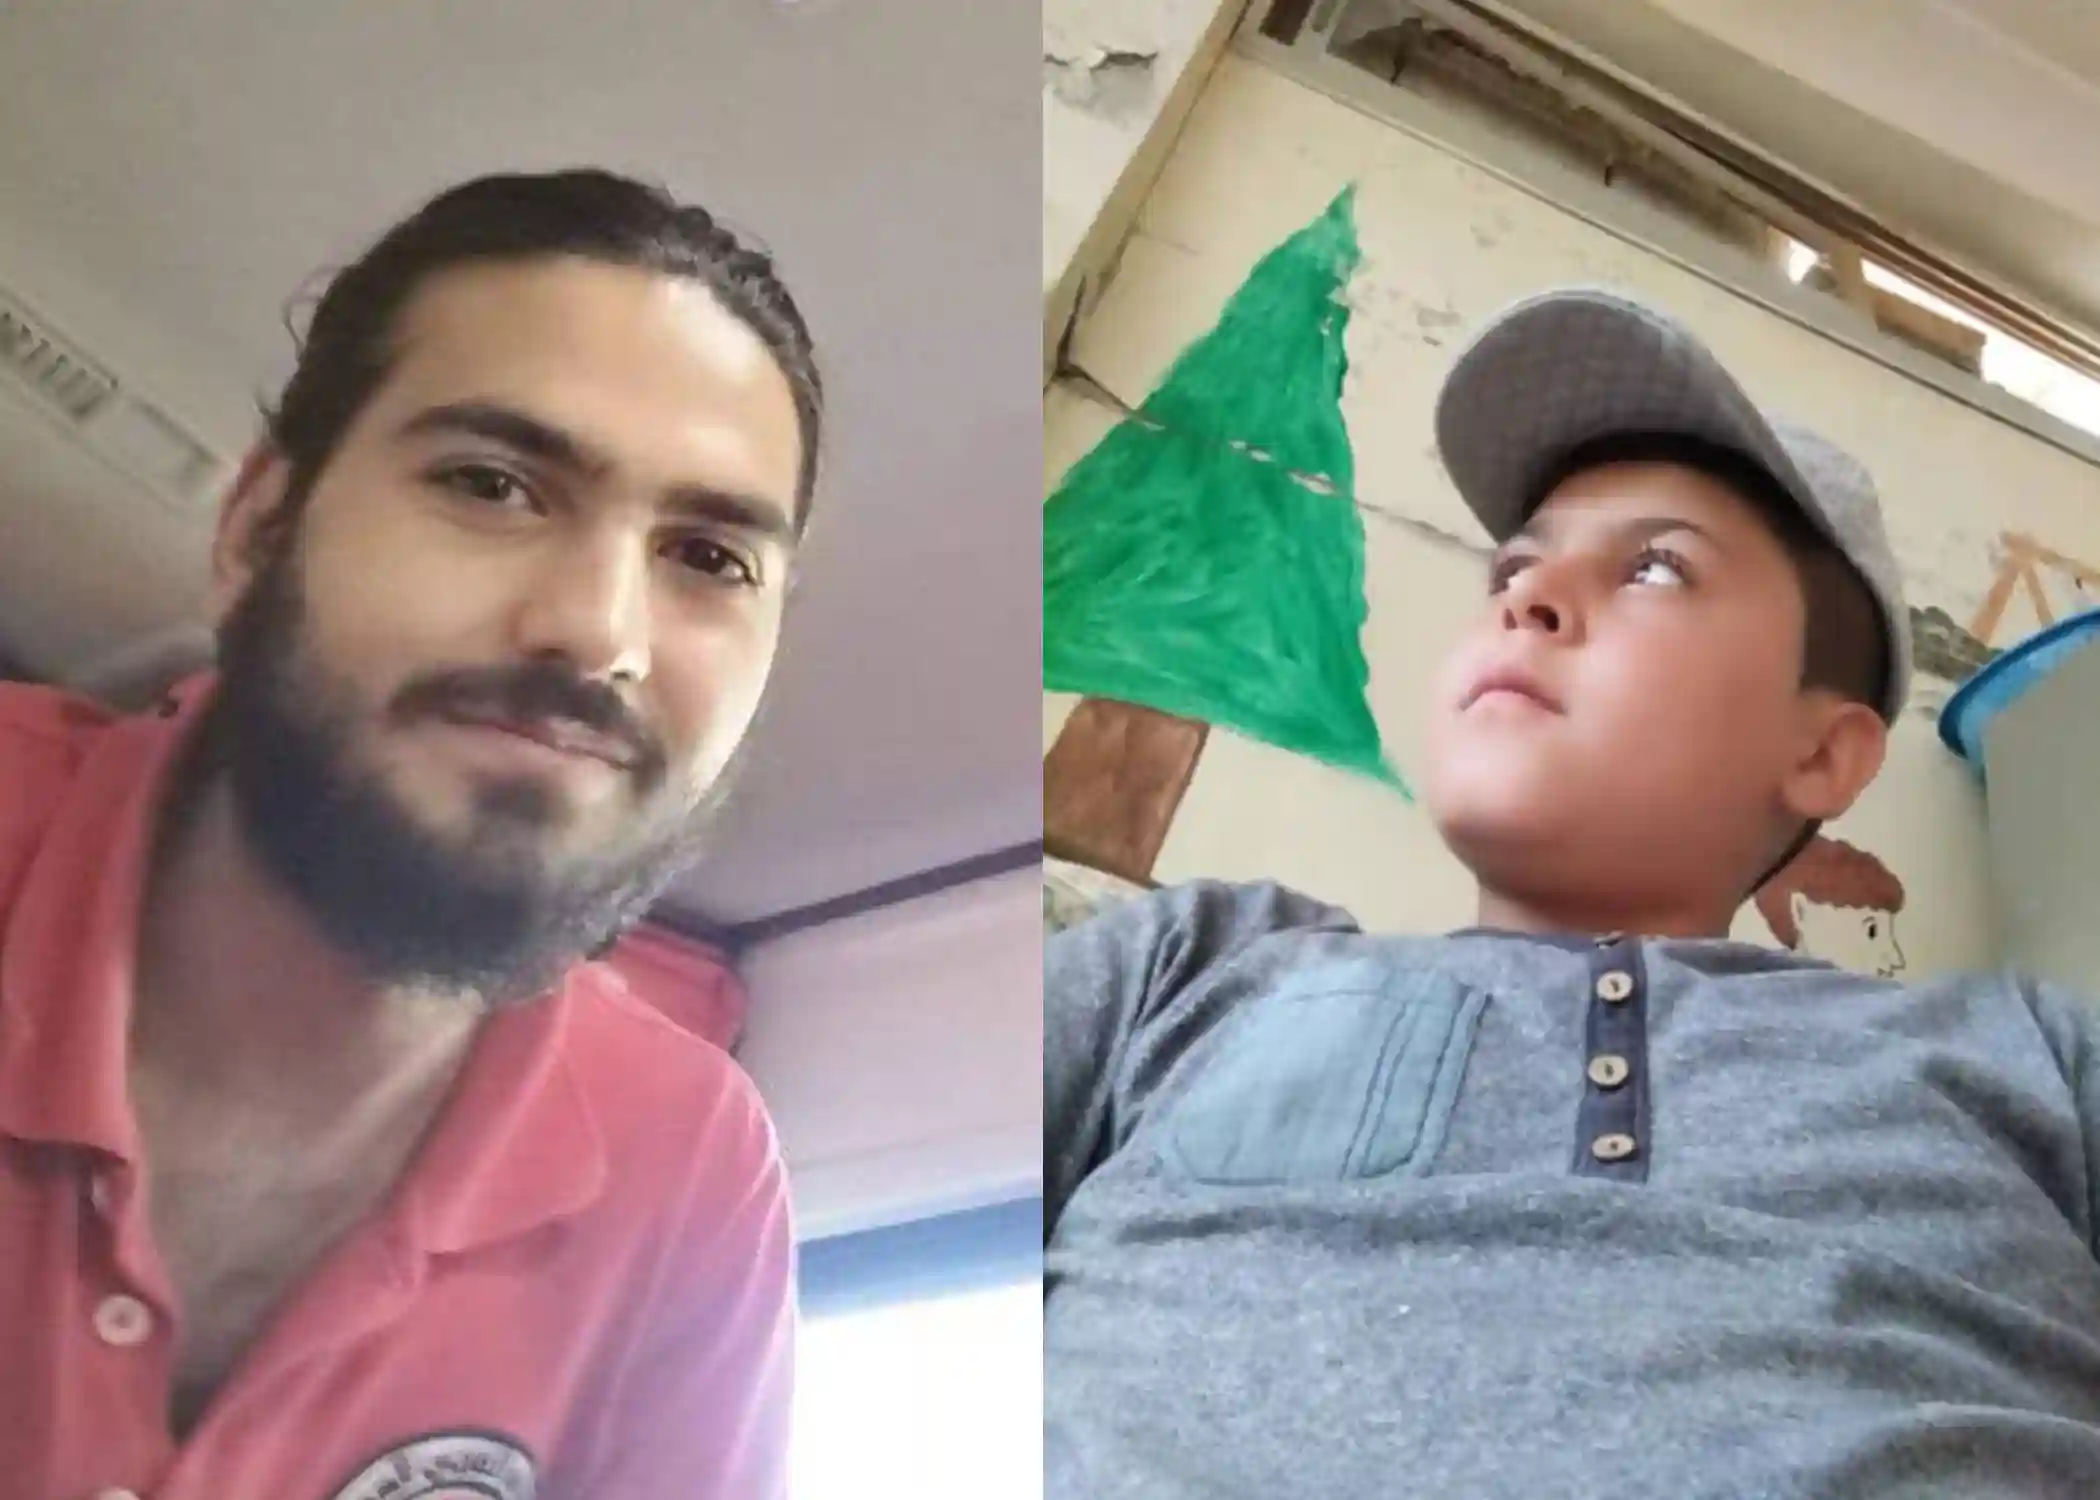 A man, identified as Bashar al-Zeer from Saraqeb city in eastern rural Idlib governorate, and a child, identified as Mahmoud Ayman Mahmoud Habbar from Idlib city, were killed on October 5, 2023, by Syrian regime forces who used a rocket launcher to fire multiple shells at the road connecting the cities of Idlib and Sarmin near the Electricity Company building in eastern rural Idlib governorate. Three other civilians were also wounded to varying degrees in the attack. The area is under the control of armed opposition factions and Hay’at Tahrir al-Sham (HTS). It should be noted that those attacks were of a retaliatory nature, with the regime ordering intensified bombardment of these areas in response to a bombing that targeted the regime’s Military College in Homs city on October 5, 2023. The Syrian Network for Human Rights (SNHR) notes that through these attacks, Syrian regime forces have again unequivocally violated Security Council resolutions 2139 & 2254, both of which categorically prohibit indiscriminate attacks, as well as violating the rules of international humanitarian law on distinguishing between civilians and fighters. Such attacks aim solely to spread fear and panic among civilians, to drive them from their lands and homes, and to forcibly displace them. It is estimated that 6.5 million people are currently internally displaced in Syria. The international community must put pressure on the Syrian regime and its allies to support a process of political transition. Pressure should be applied on all parties to compel them to launch such a transition within a period of no more than six months, so that millions of displaced people can safely and stably return to their homes.